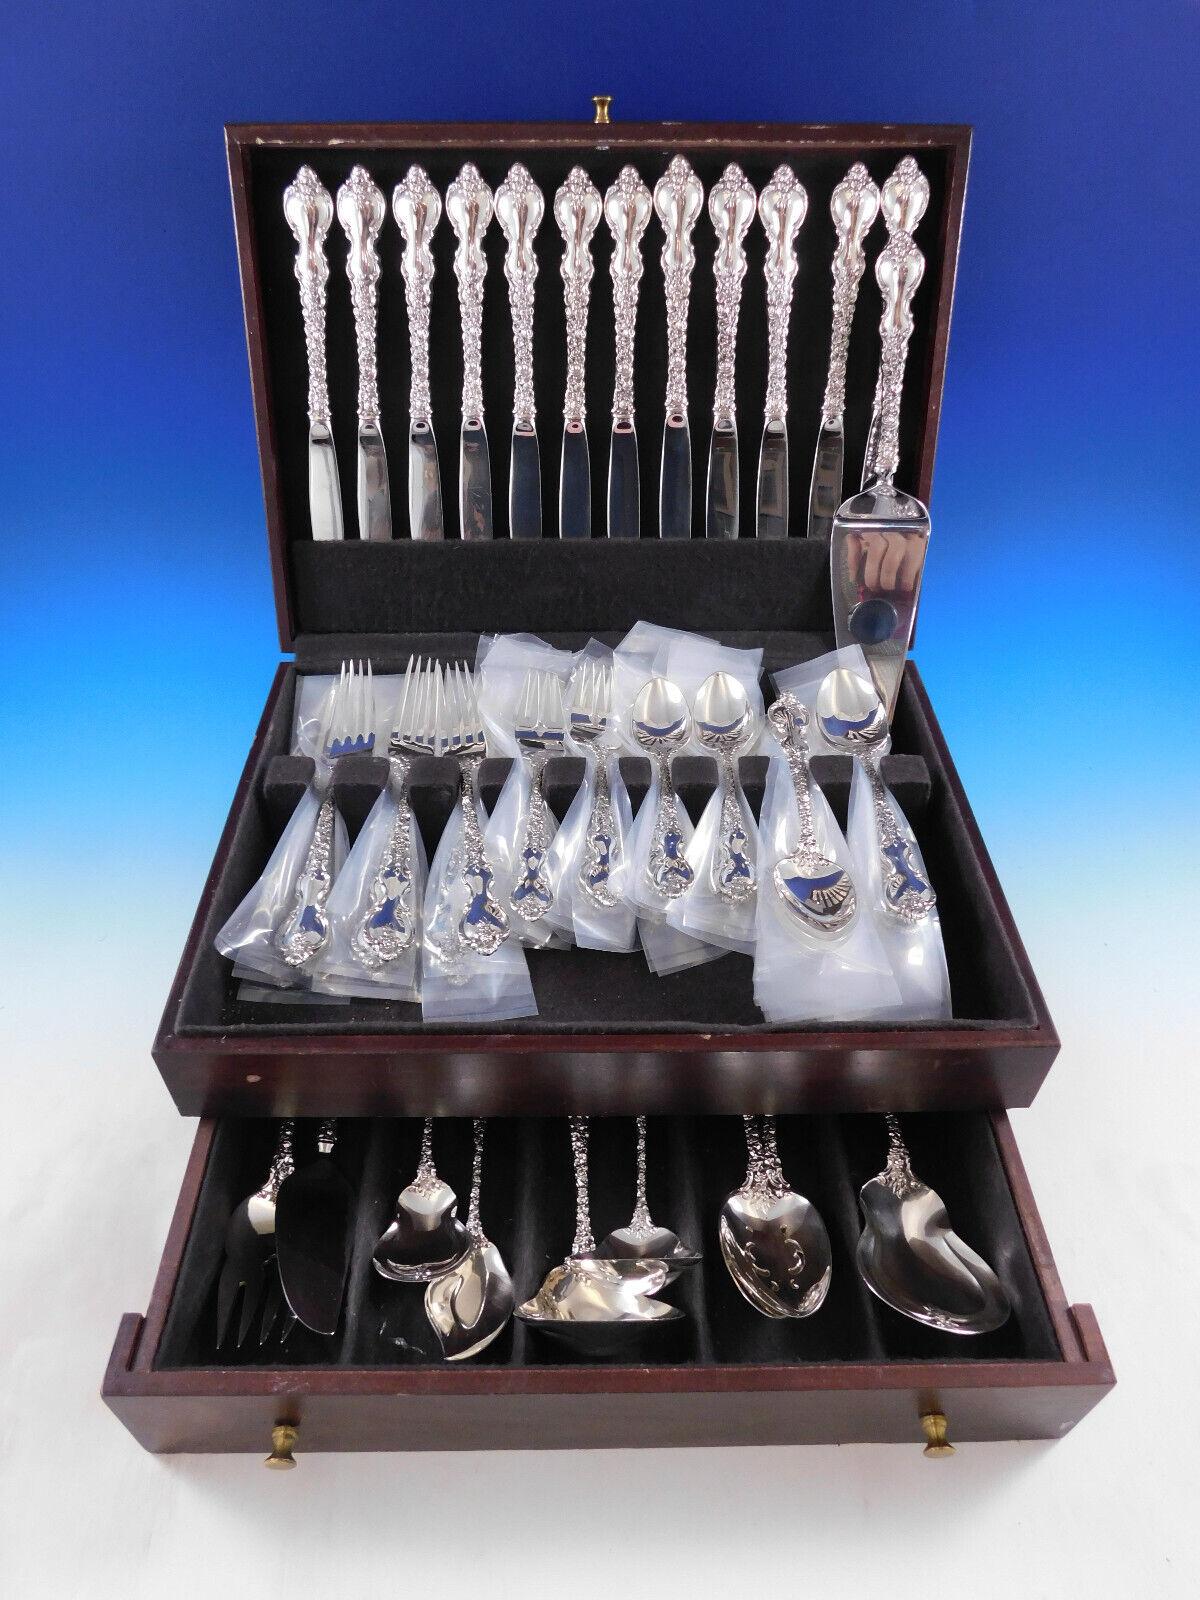 Dinner Size Du Barry by International sterling silver Flatware set, 70 pieces. This set includes:

12 Dinner Size Knives, 9 3/4